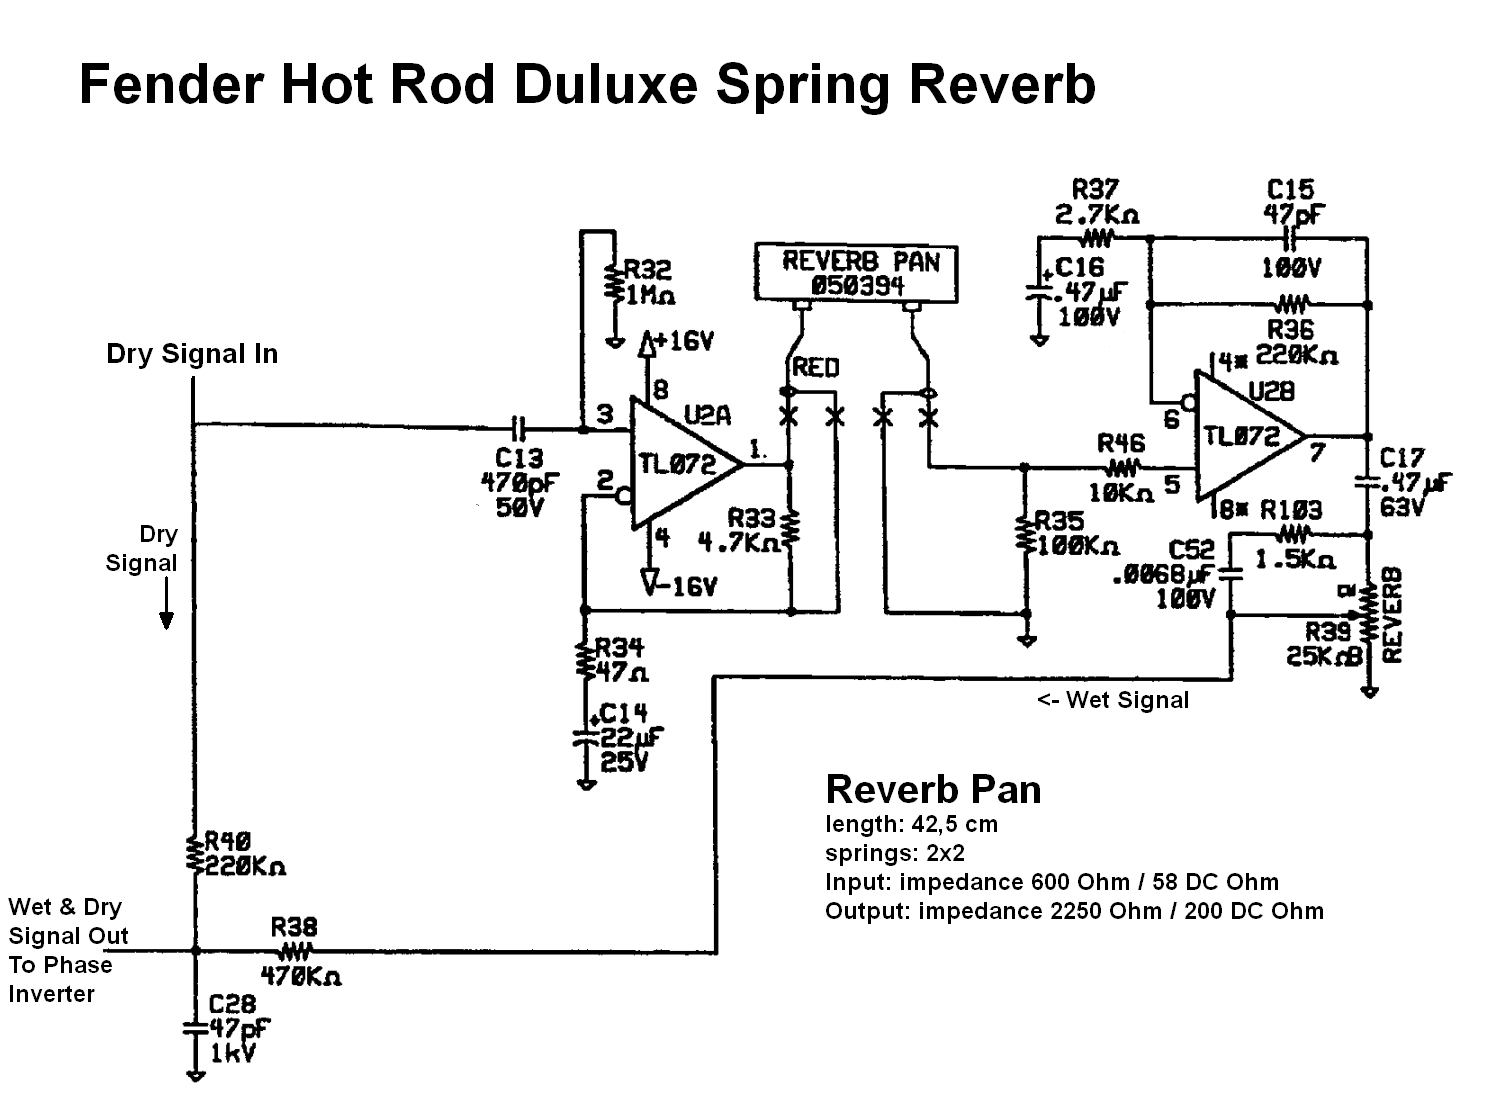 SS_Reverb_Hot_Rod_Deluxe_SS_Reverb.bmp